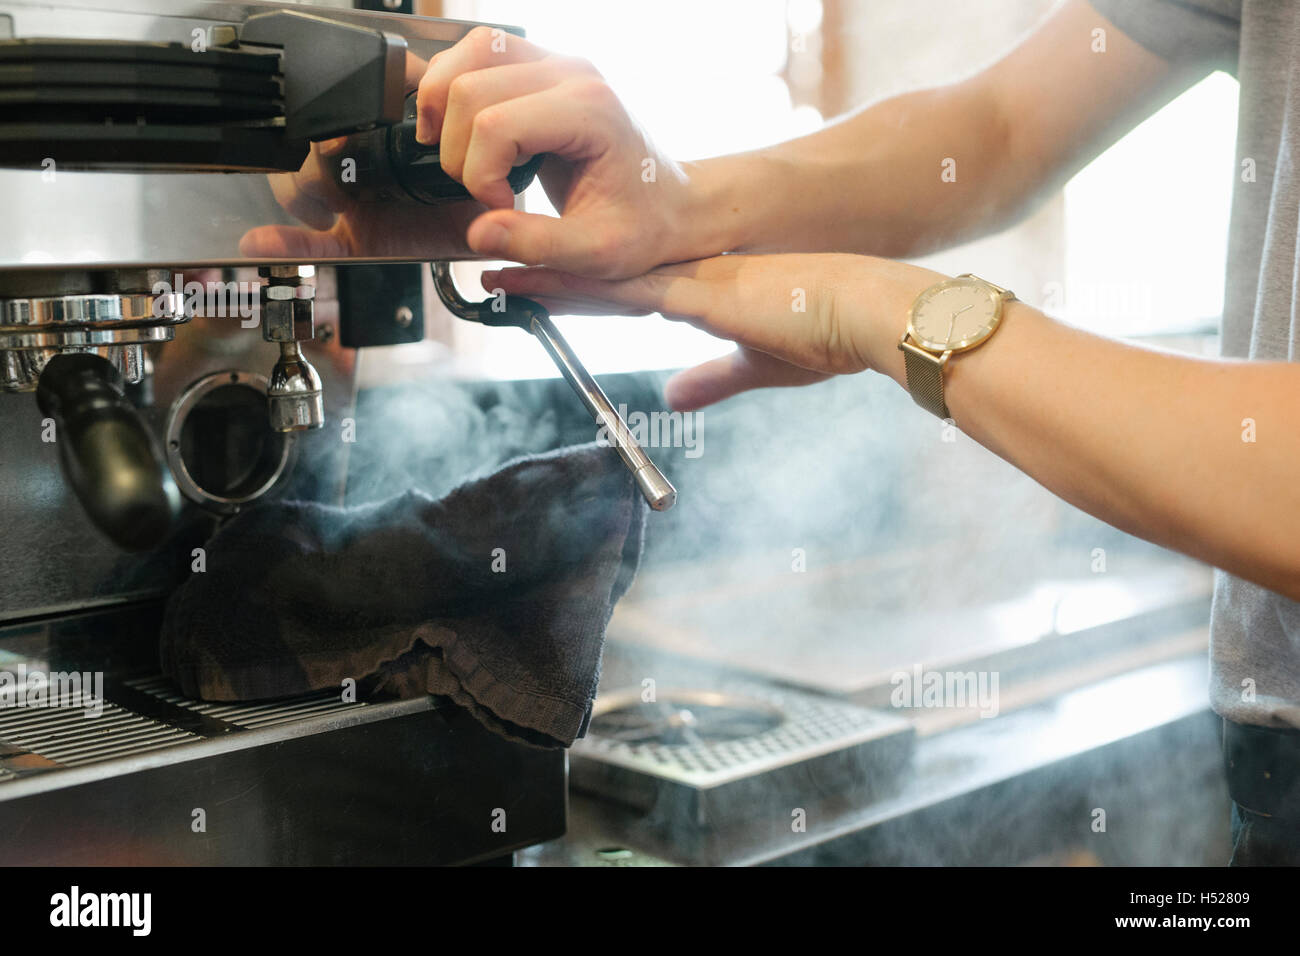 Close up of steam coming out of a commercial espresso machine. Stock Photo